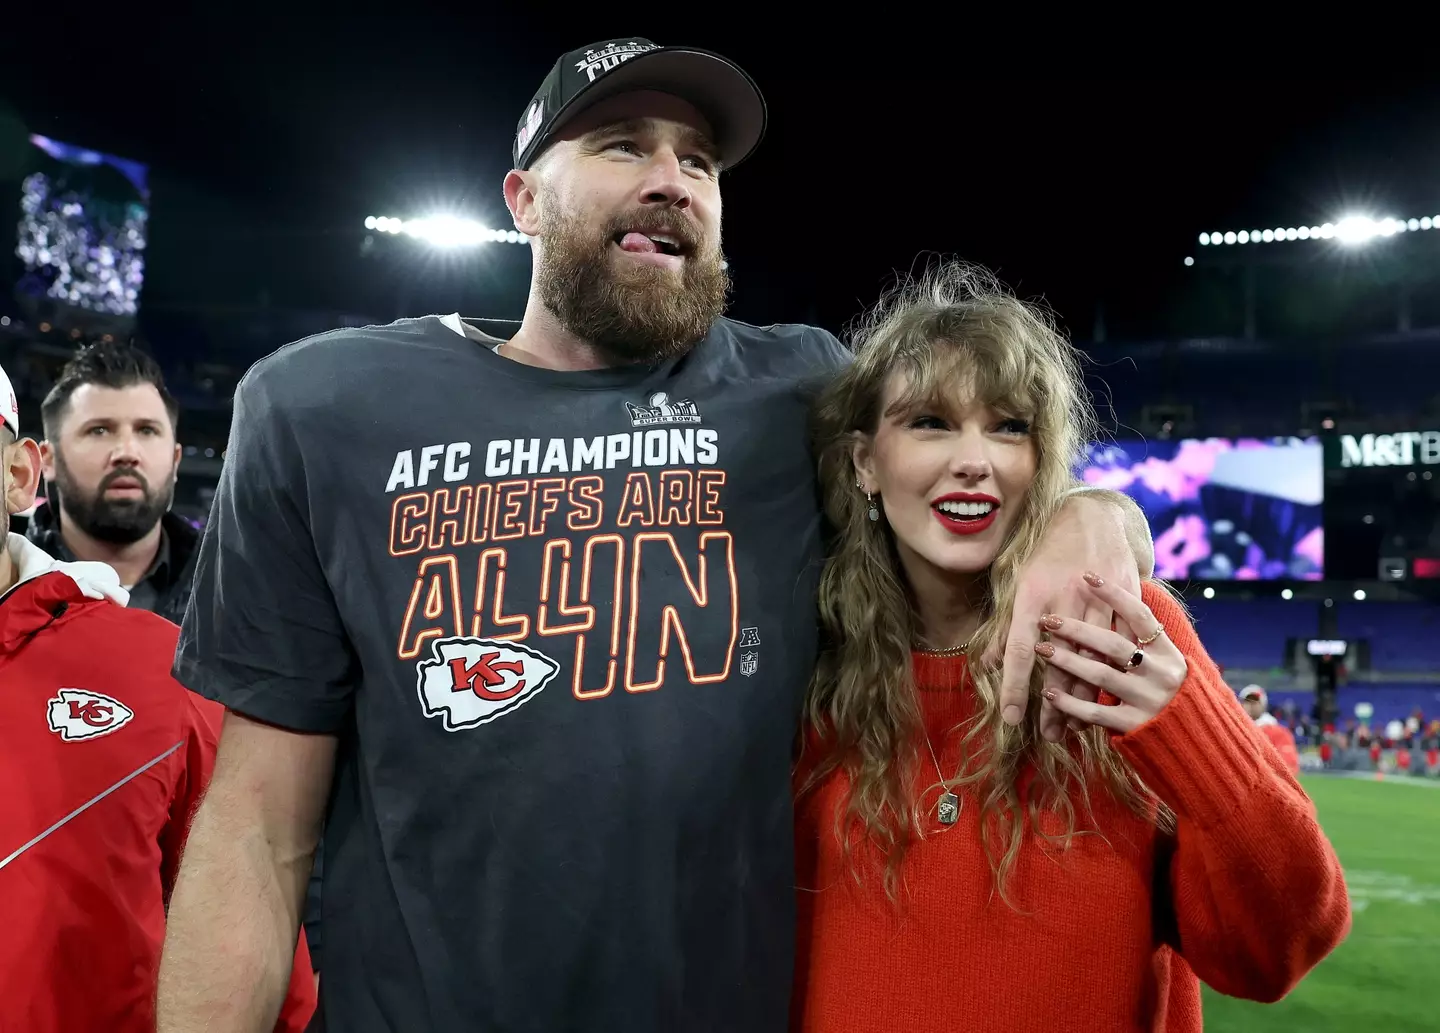 Taylor Swift might not be able to make the Super Bowl due to tour commitments.